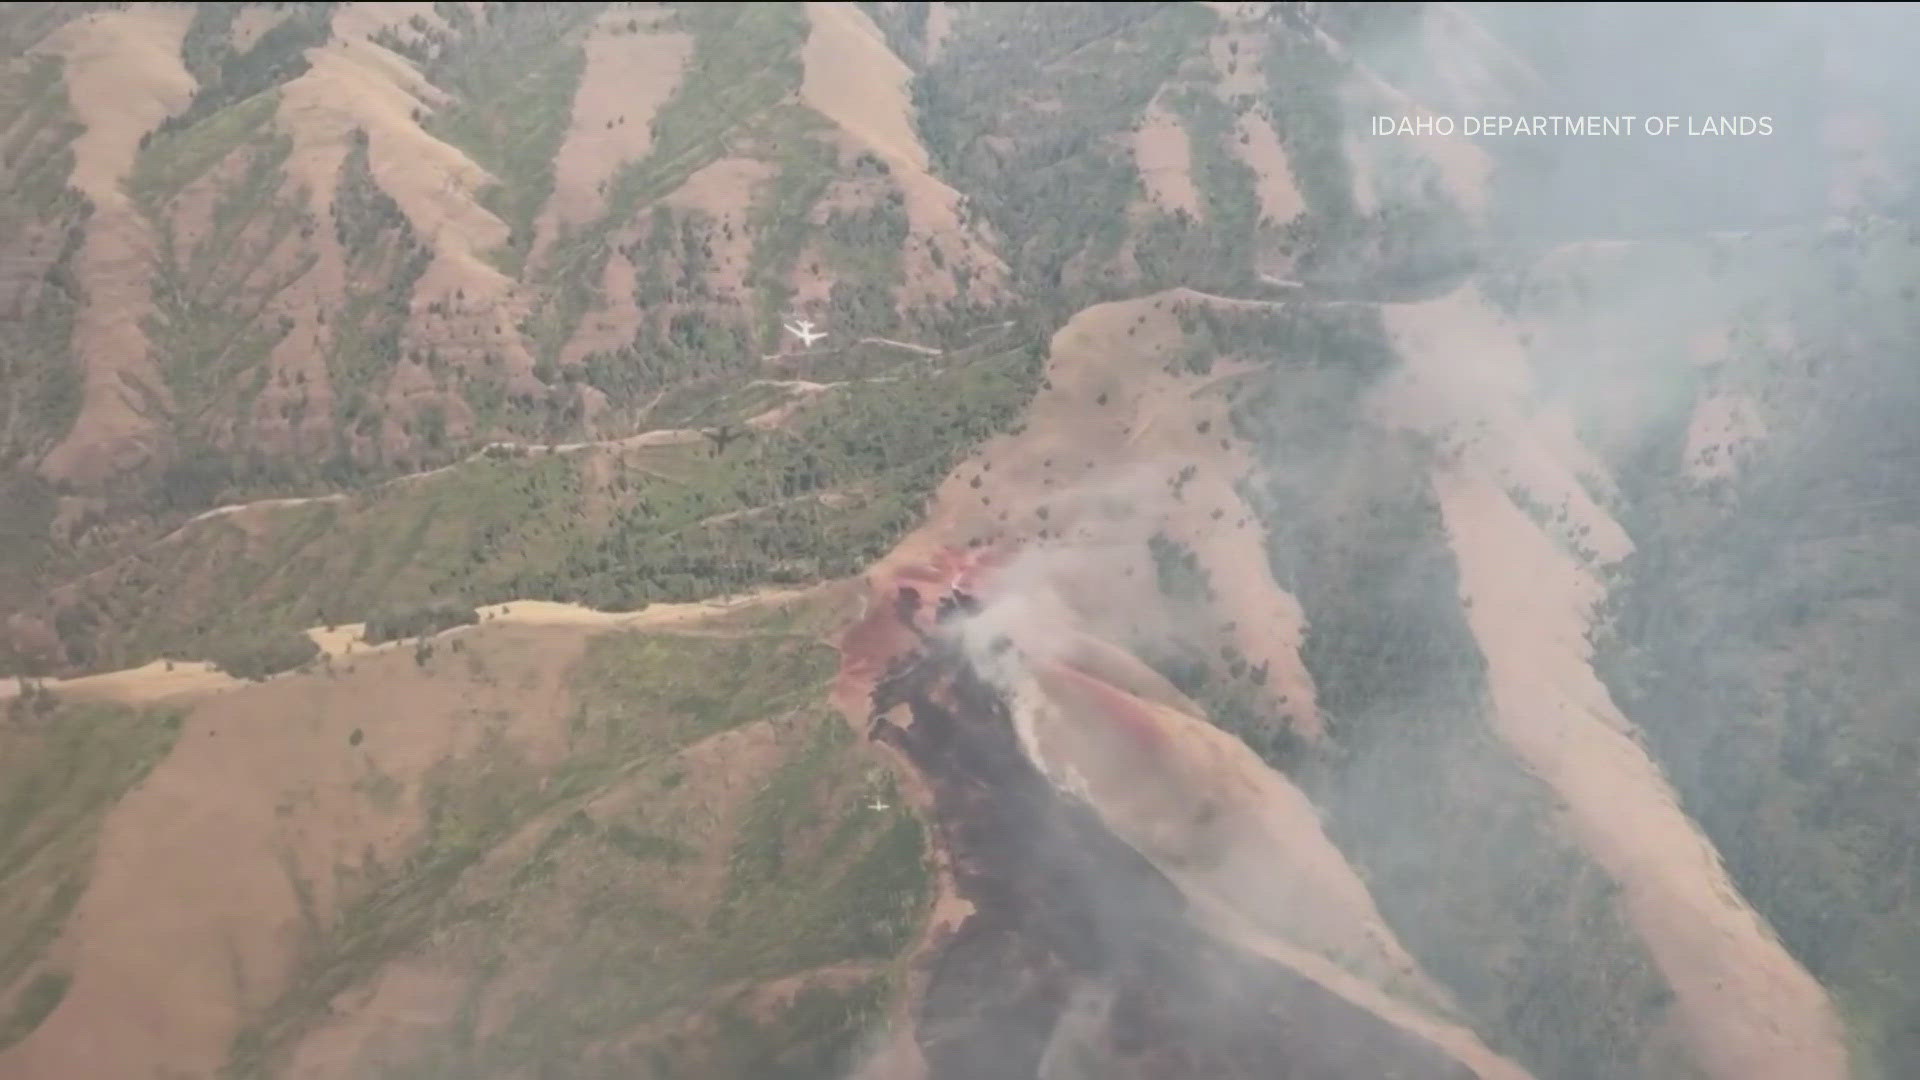 The Idaho Department of Lands says the fire is at 3,155 acres